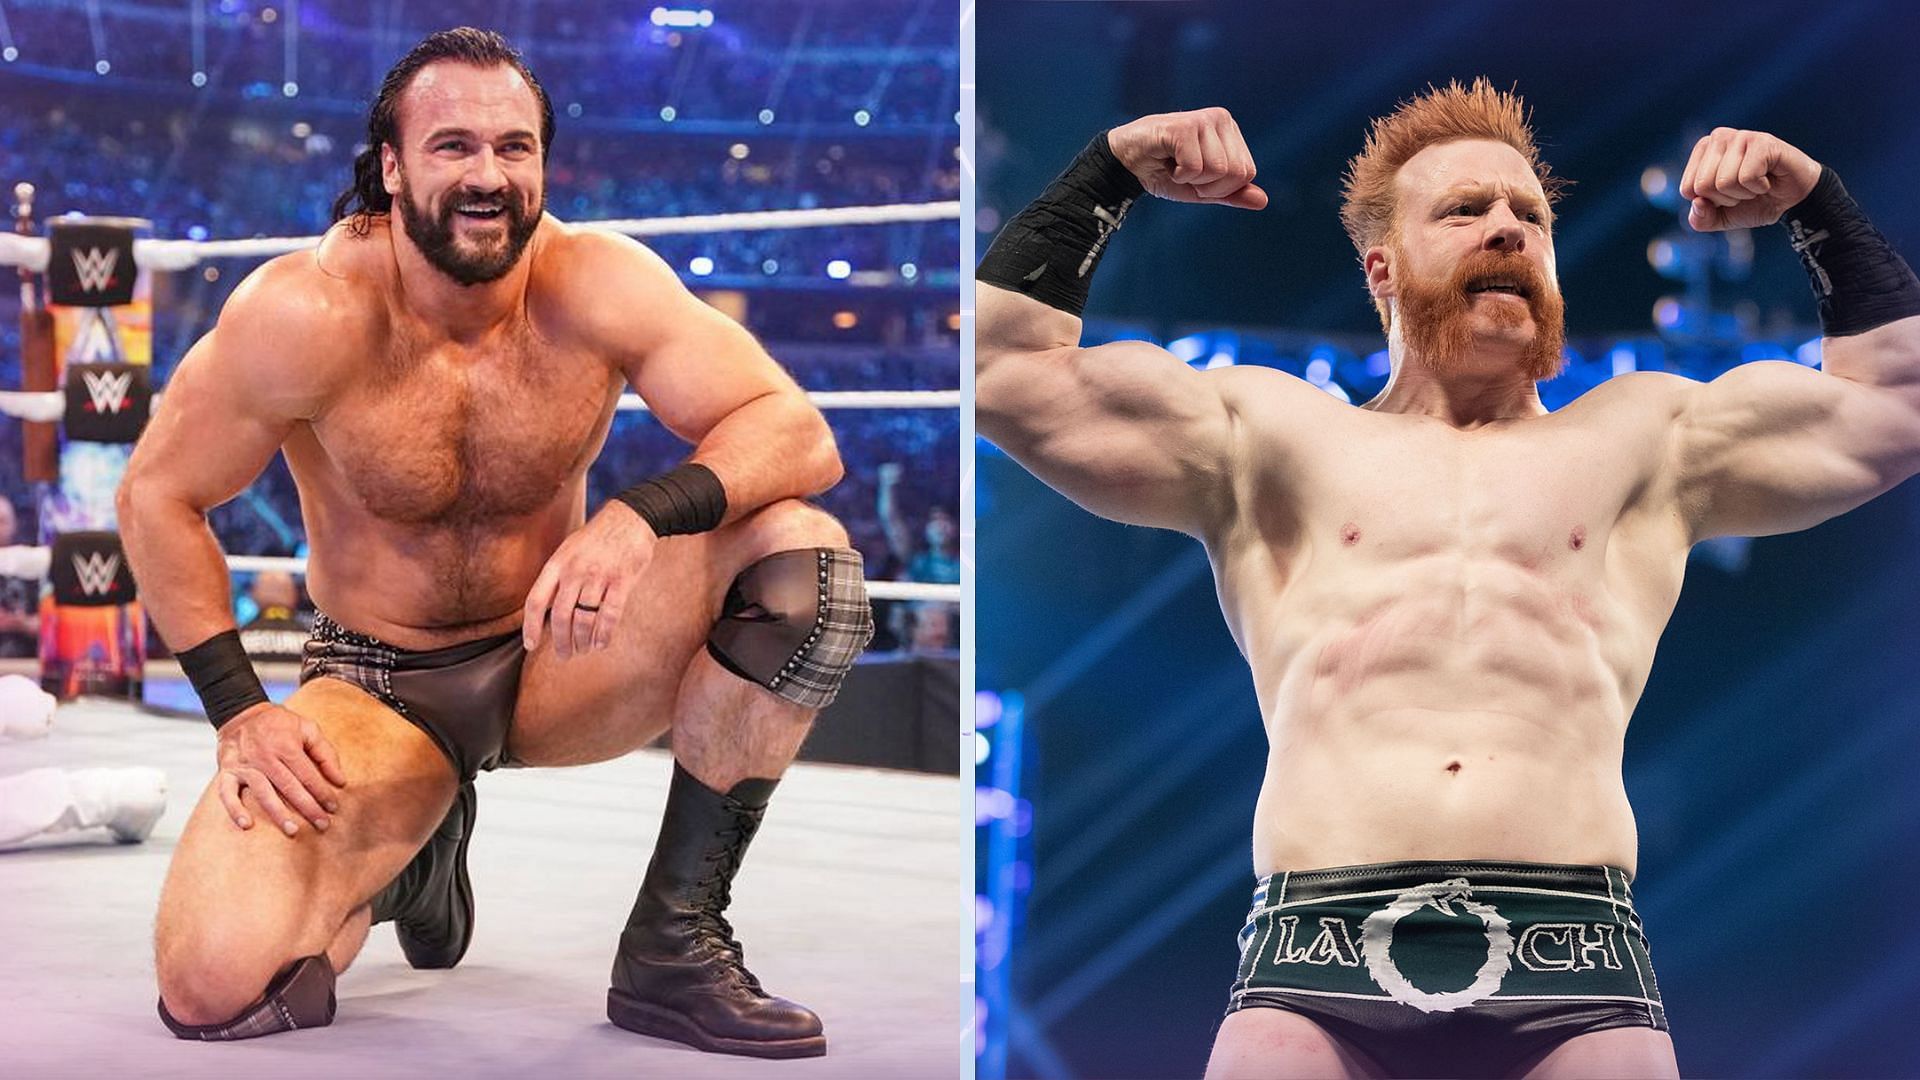 Drew McIntyre &amp; Sheamus are rumored to be working together at WWE WrestleMania Hollywood